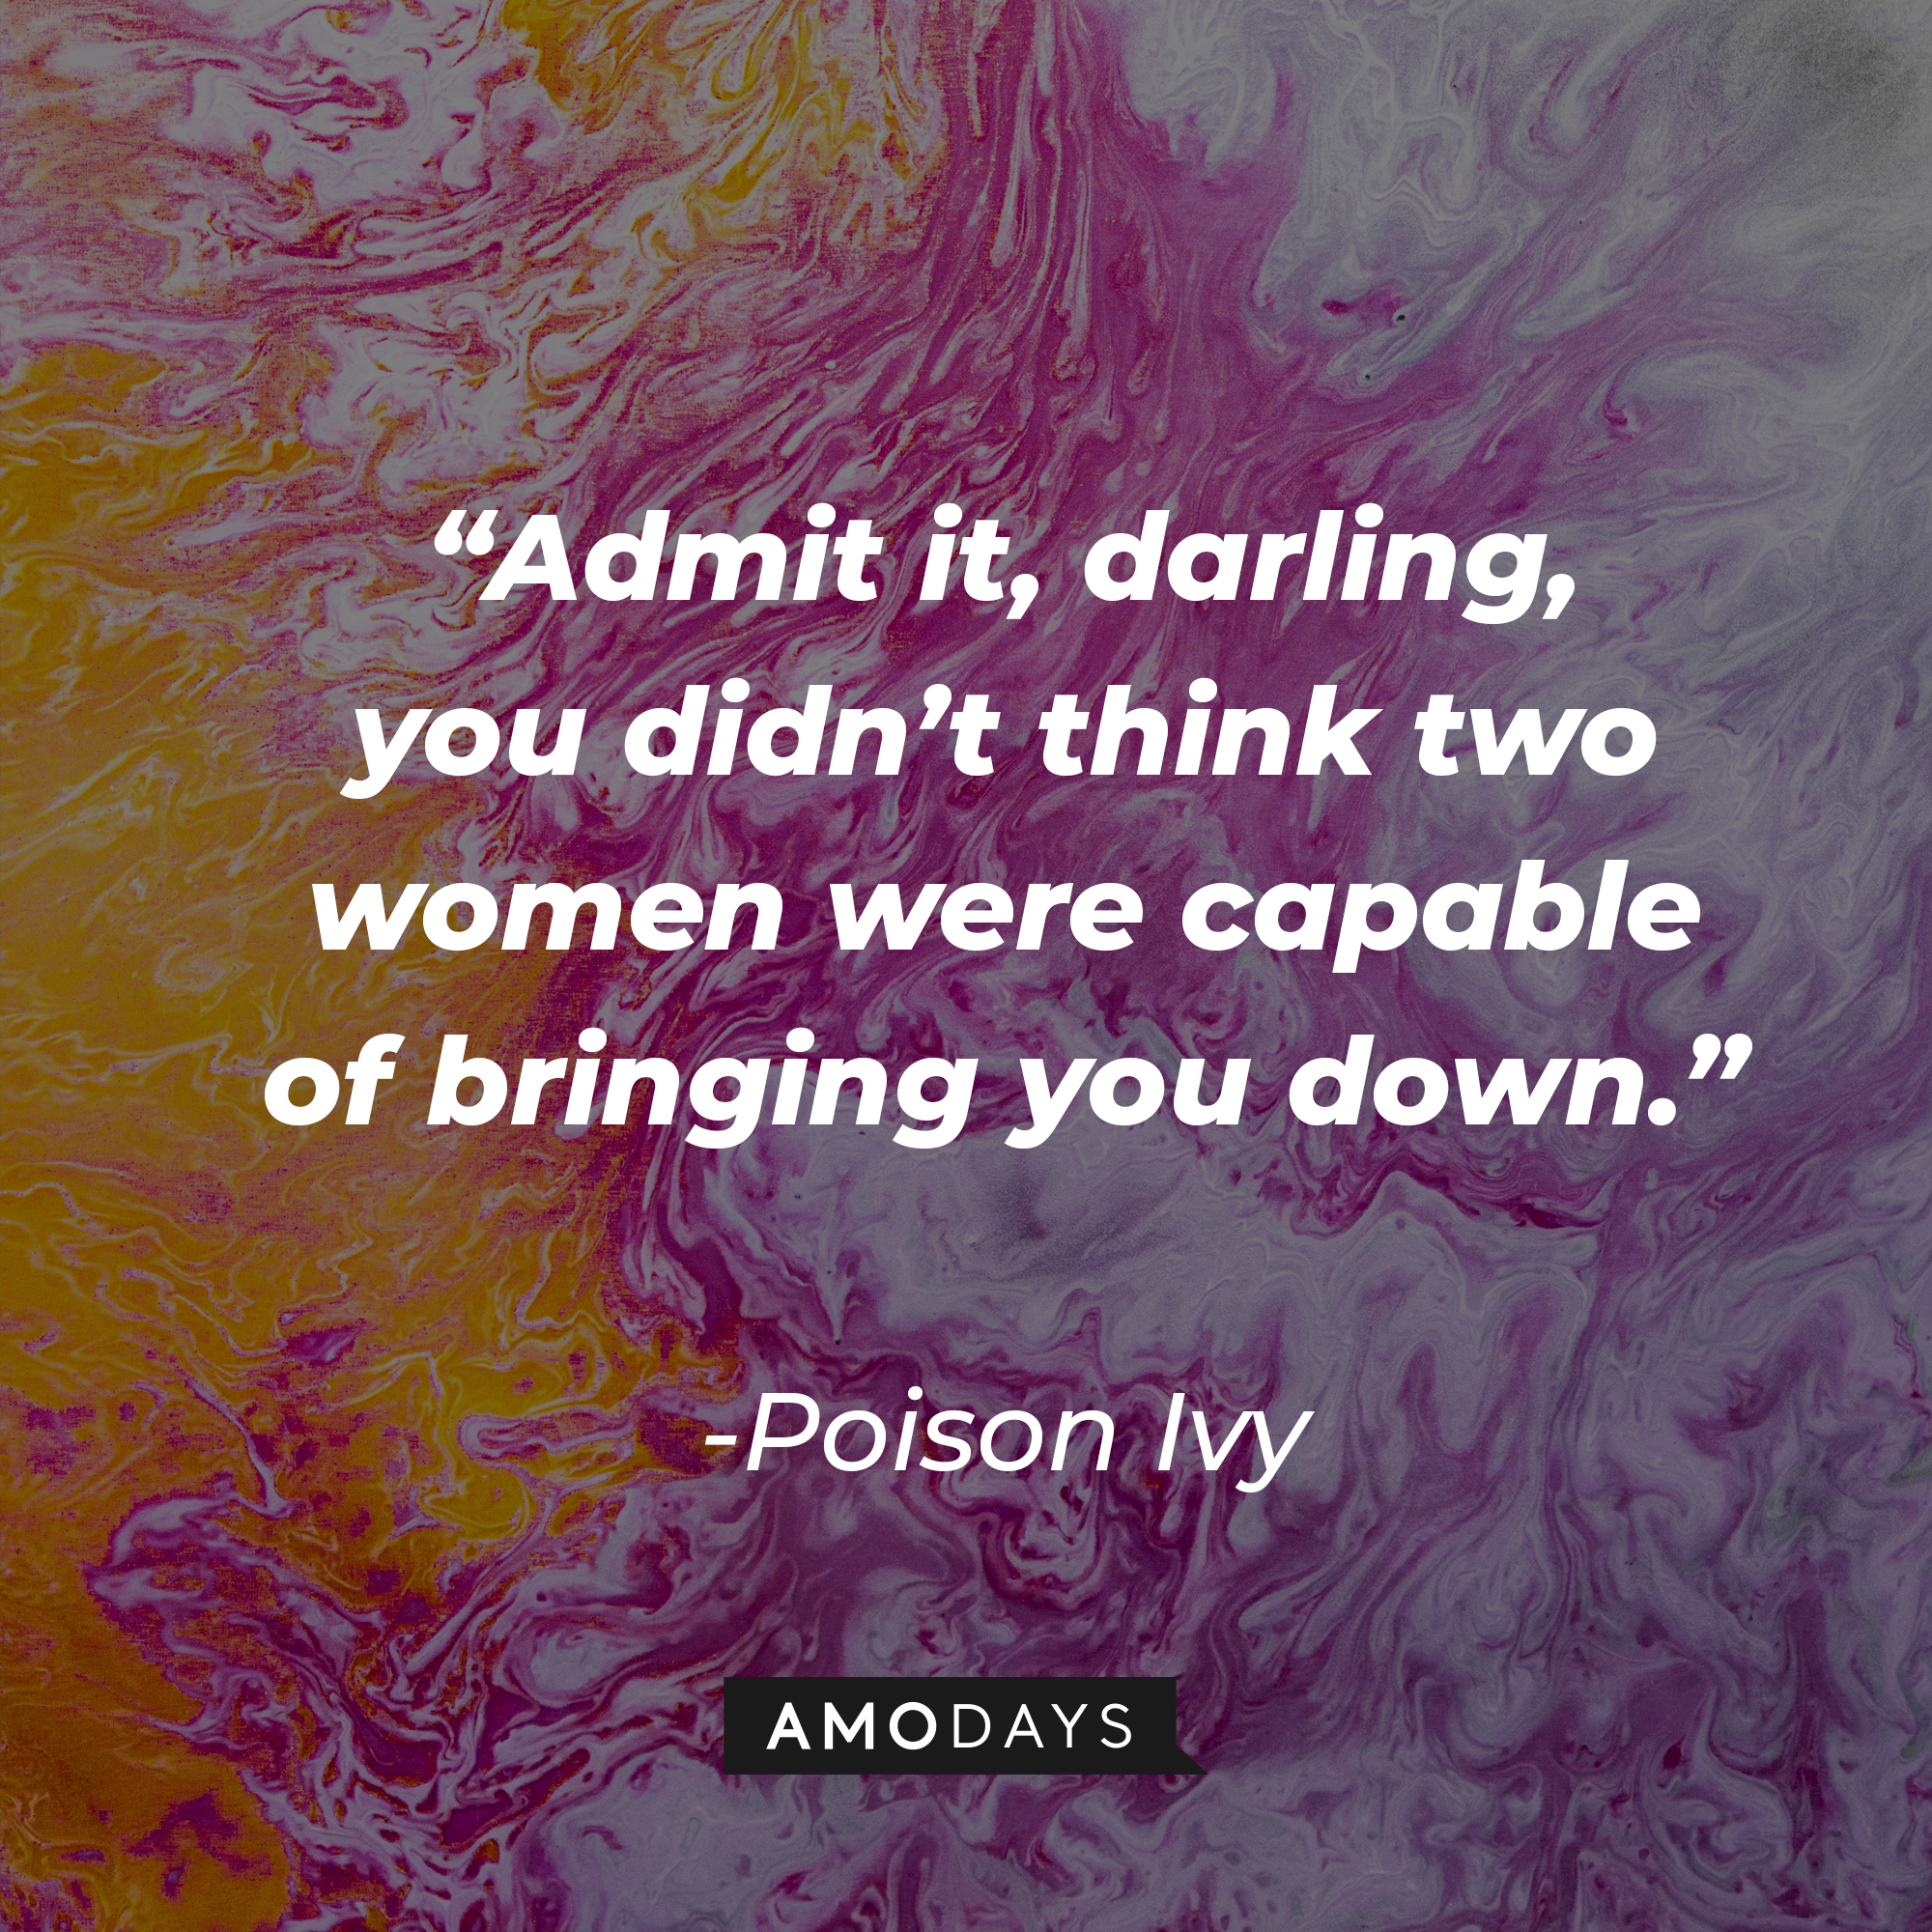 Poison Ivy’s quote: “Admit it, darling, you didn’t think two women were capable of bringing you down.” | Image: Unsplash